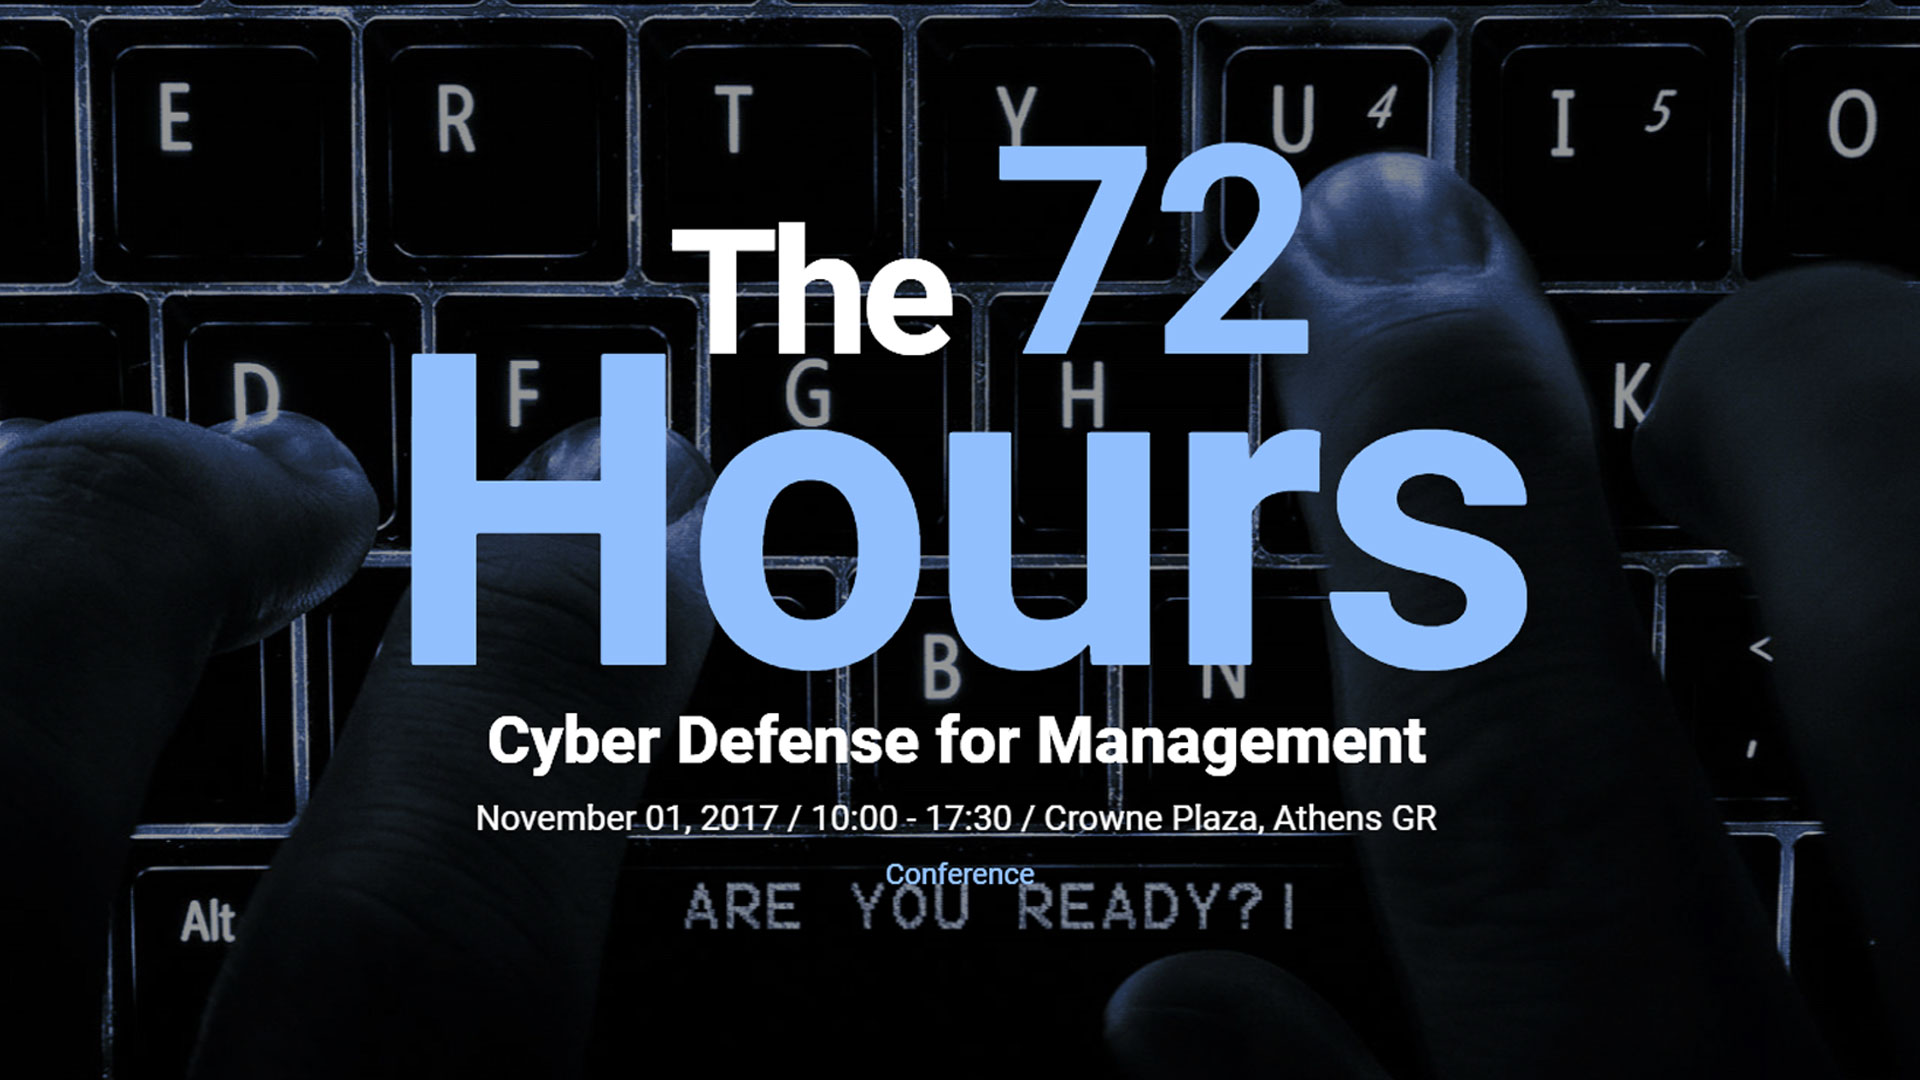 Cyber Defense for Management | Conference